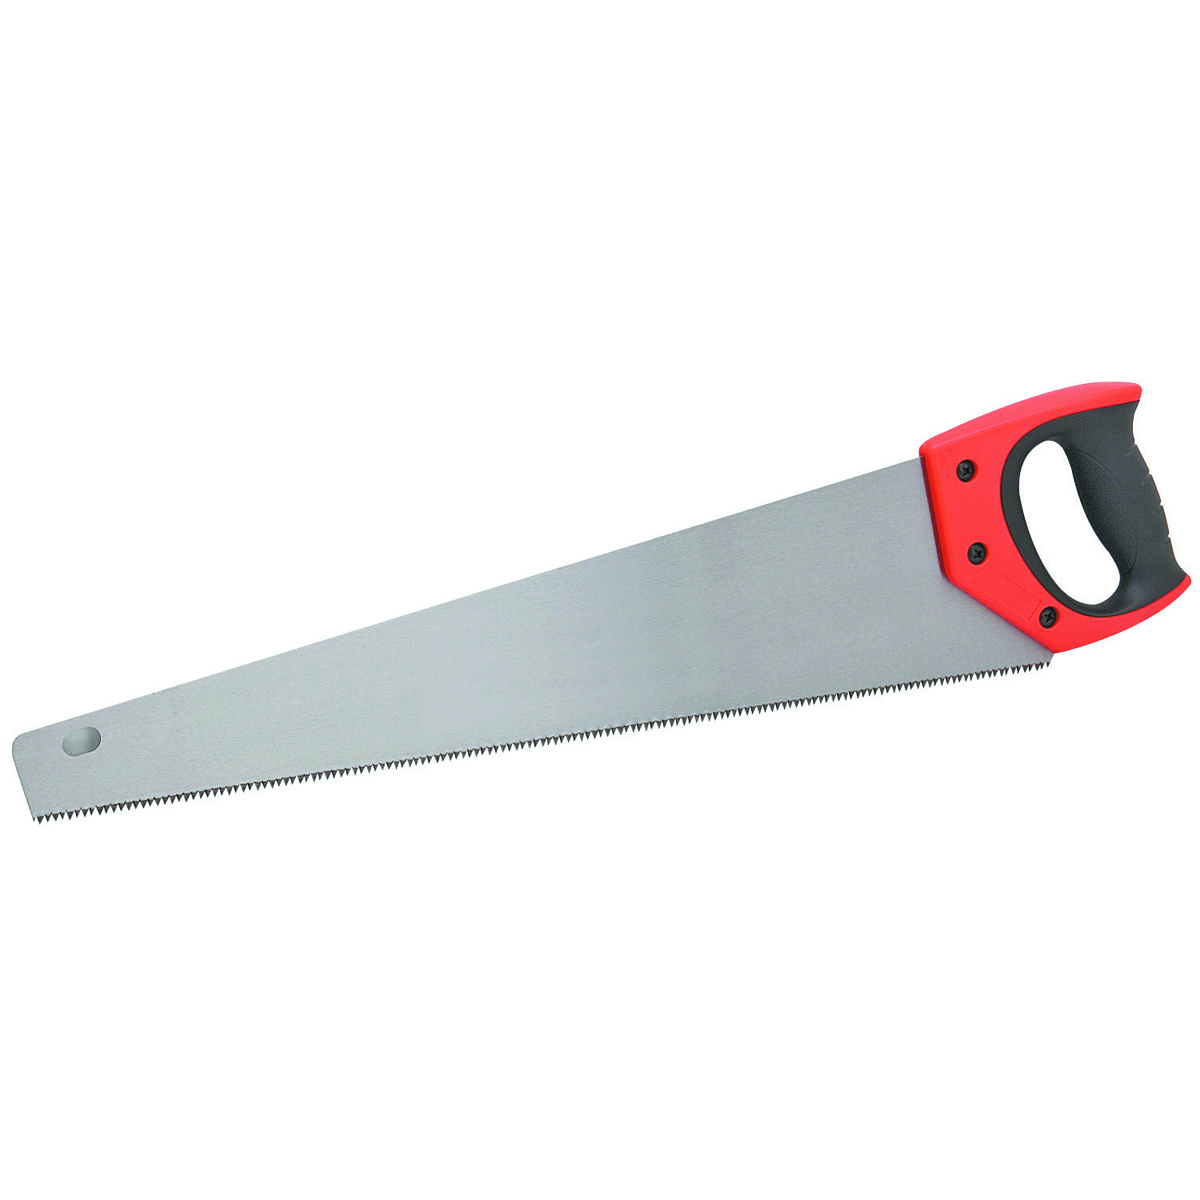 PORTLAND 22 In. Hand Saw with TPR Handle - Item 65484